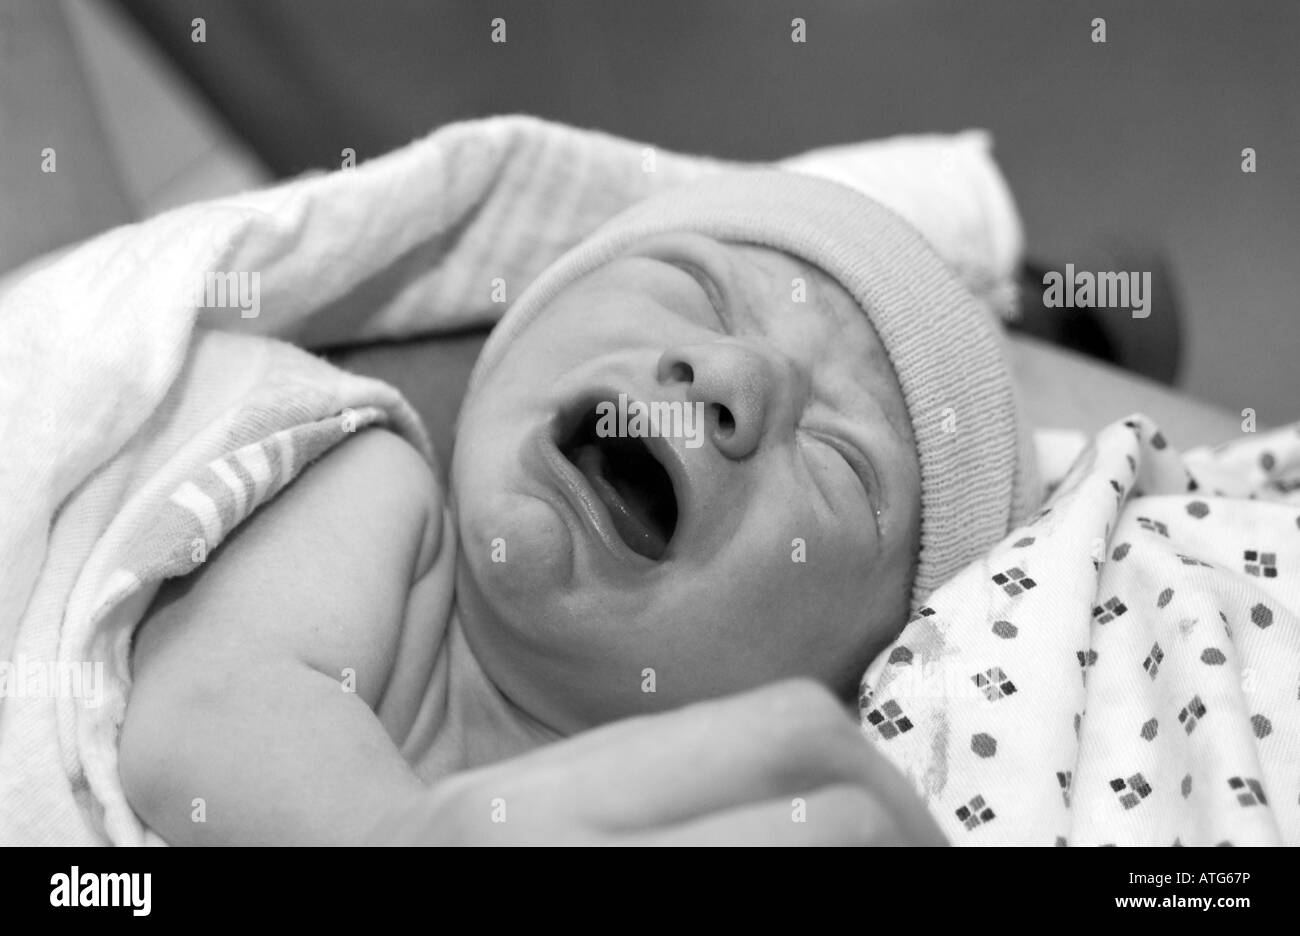 Crying newborn infant baby boy only minutes old Stock Photo